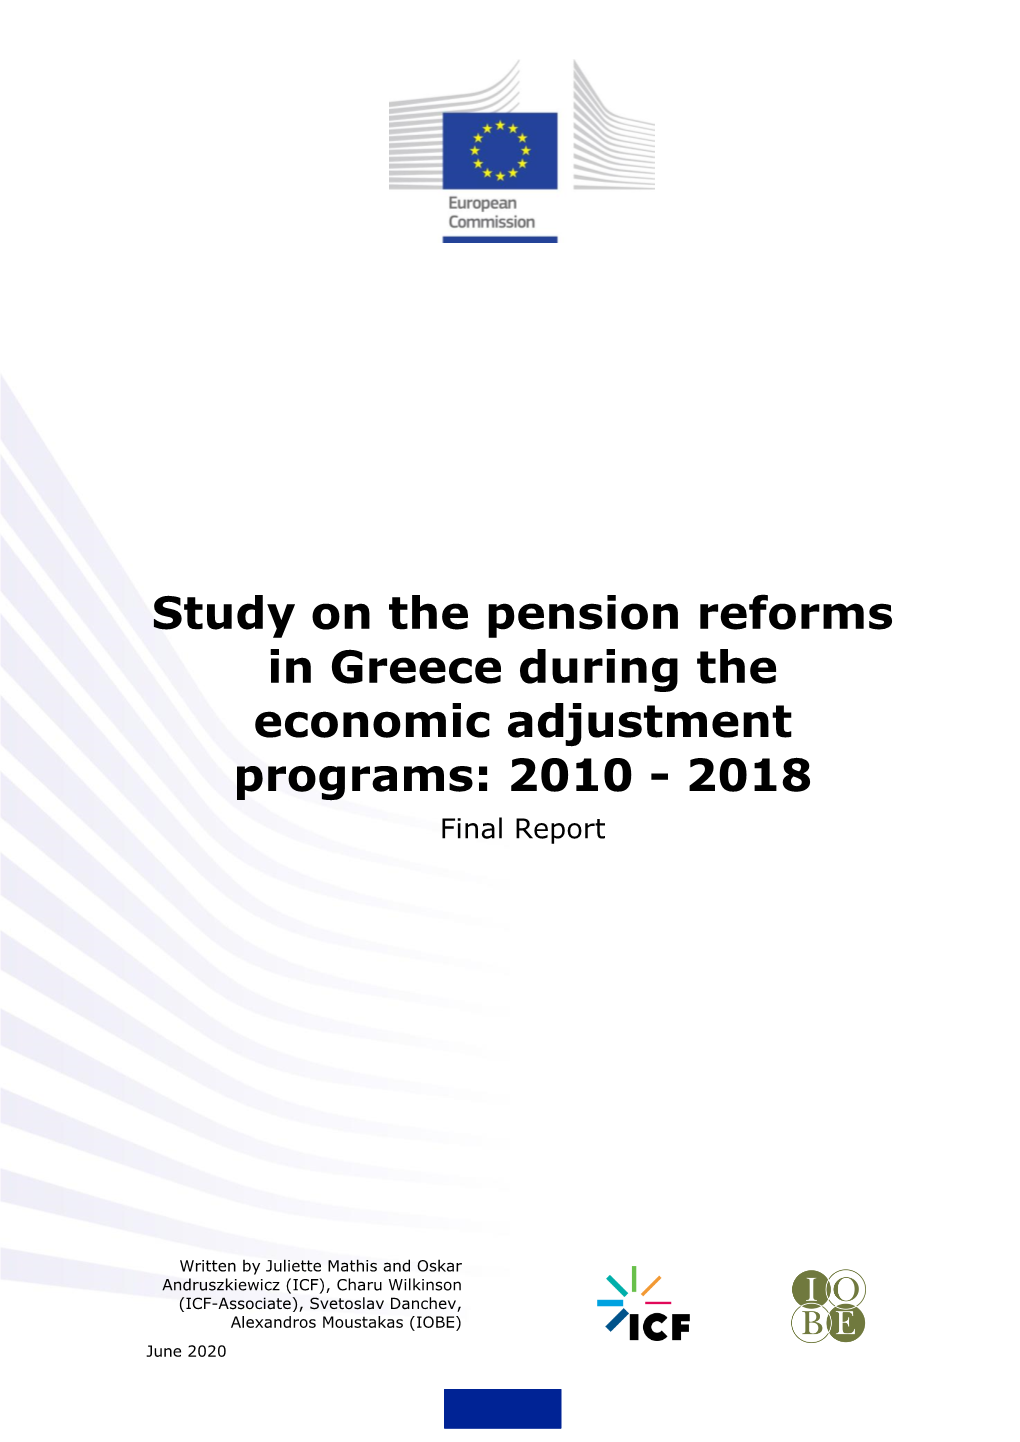 Study on the Pension Reforms in Greece During the Economic Adjustment Programs: 2010 - 2018 Final Report